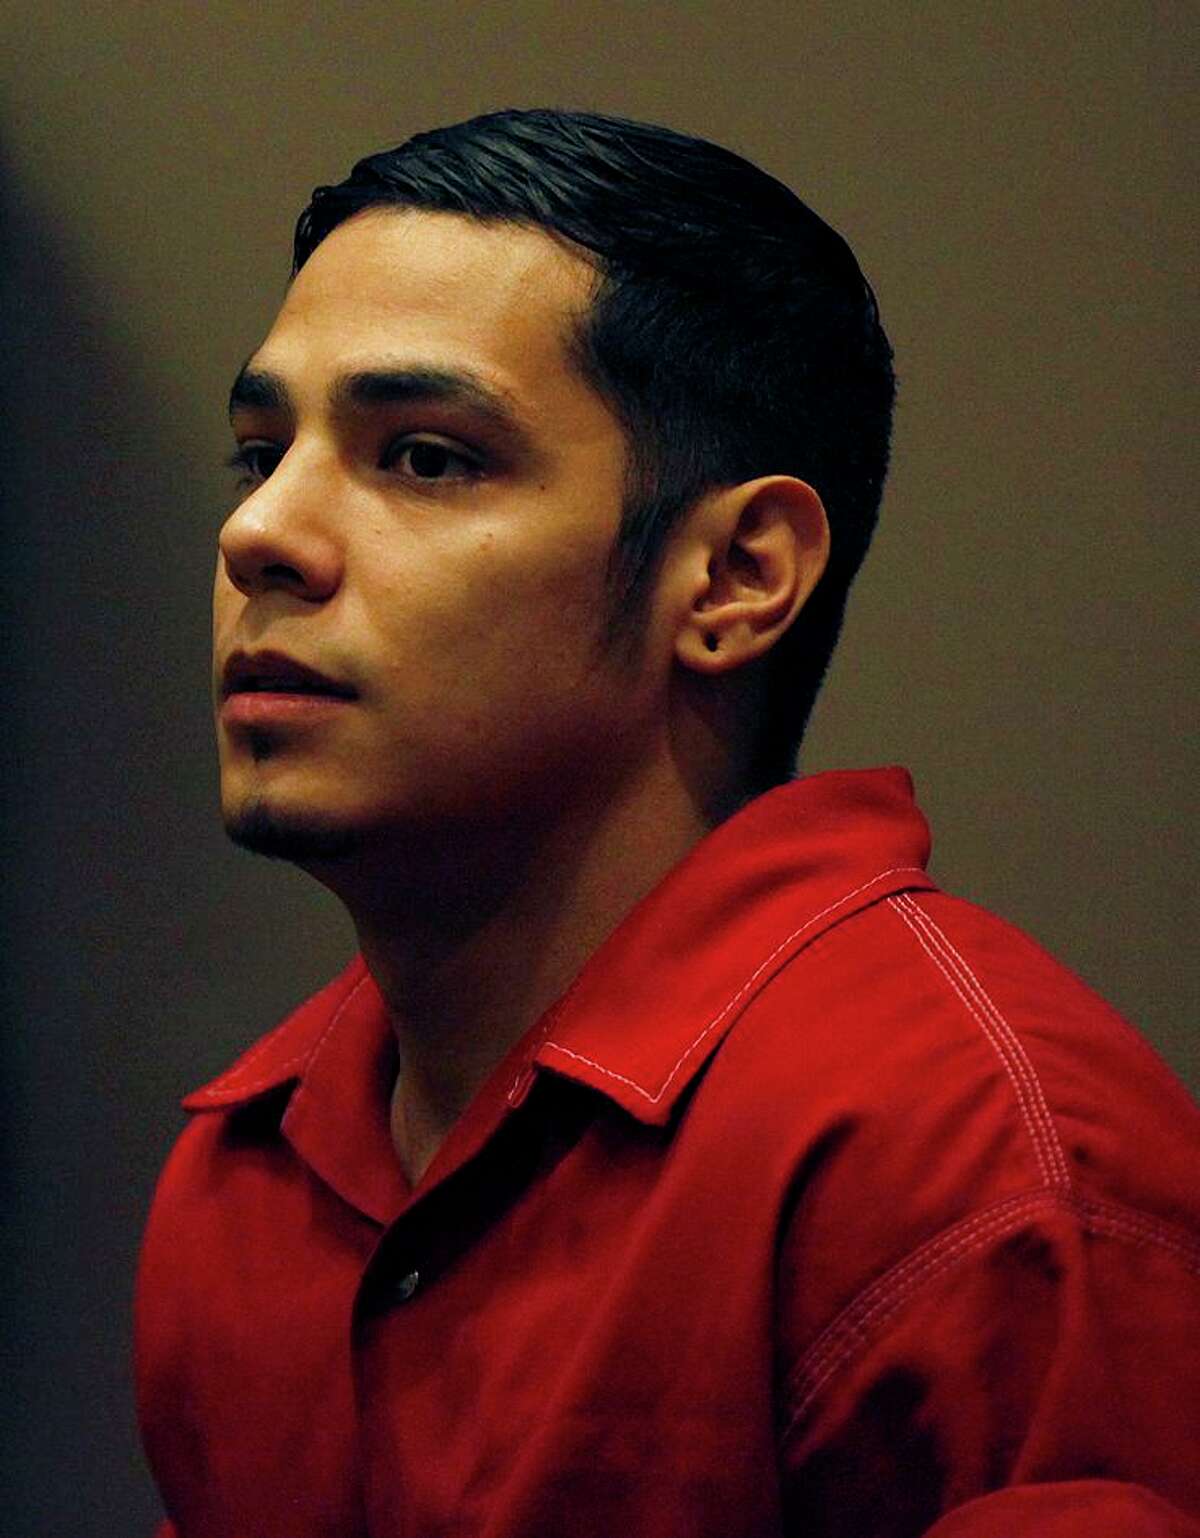 Death Row inmate Noah Espada watches the proceedings of an appeal hearing in the 399th District Court at the Cadena-Reeves Justice Center in San Antonio in 2012. After years of appeals that countered initial testimony about his behavior in jail, he was resentenced to life in prison on Friday.